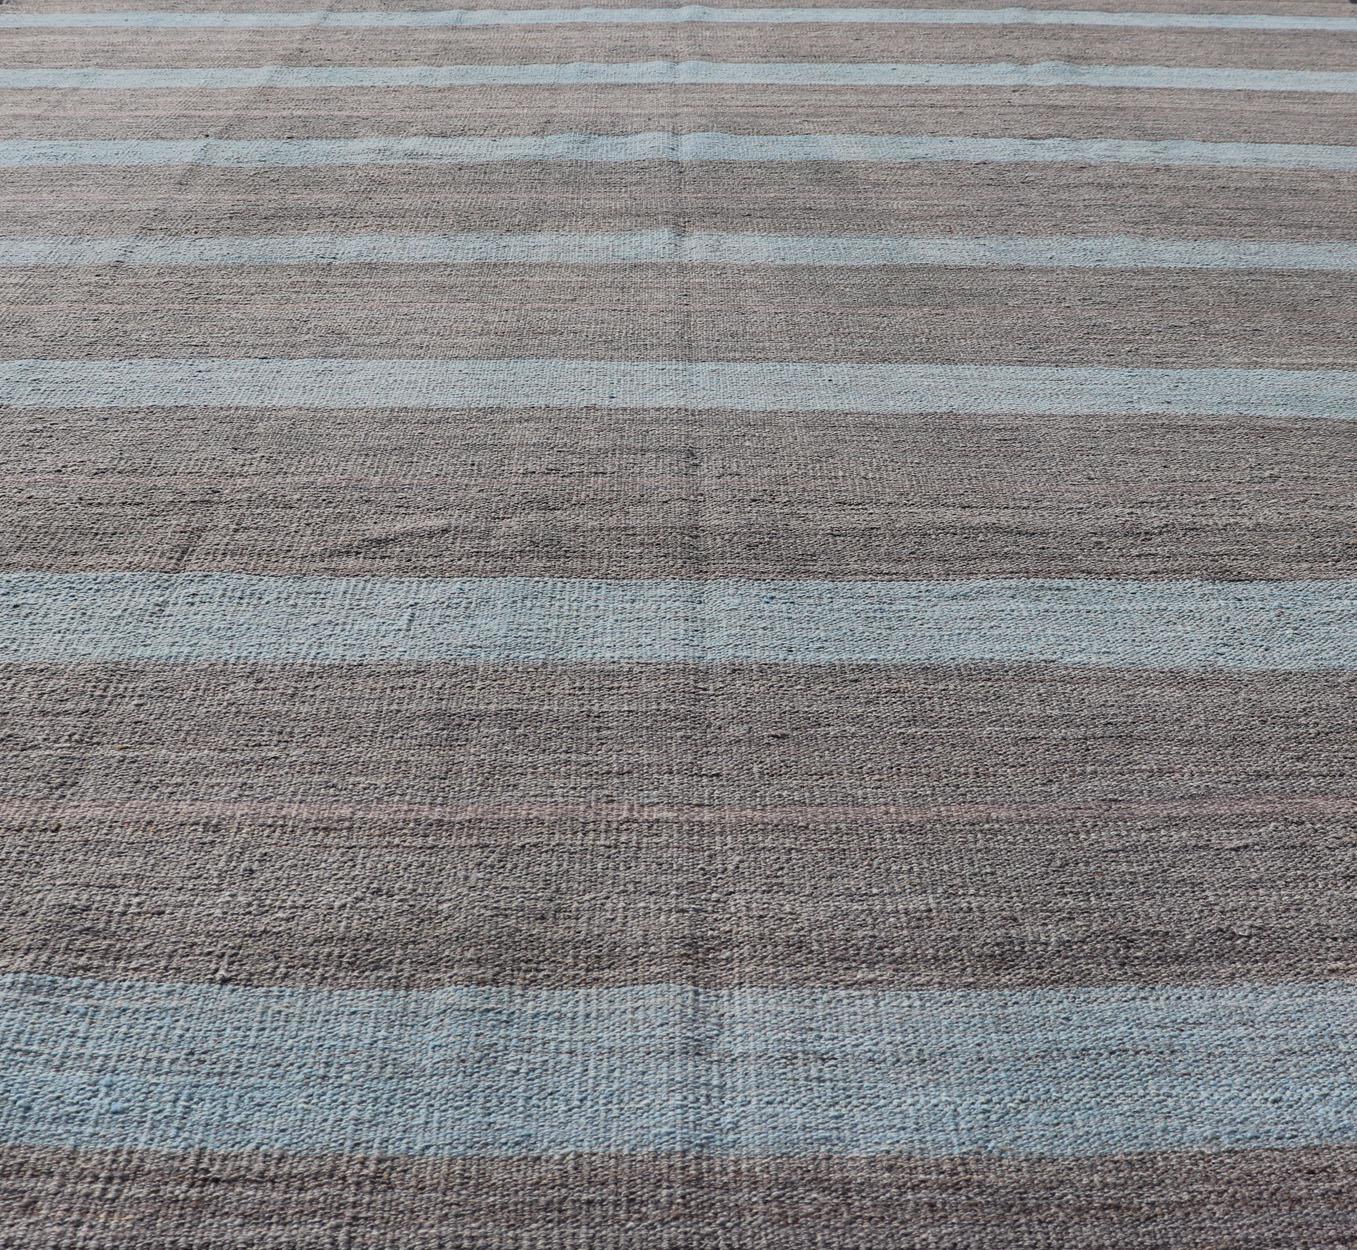 Contemporary Modern Kilim Casual Rug with Stripes in Shades of Blue, Gray' and Charcoal